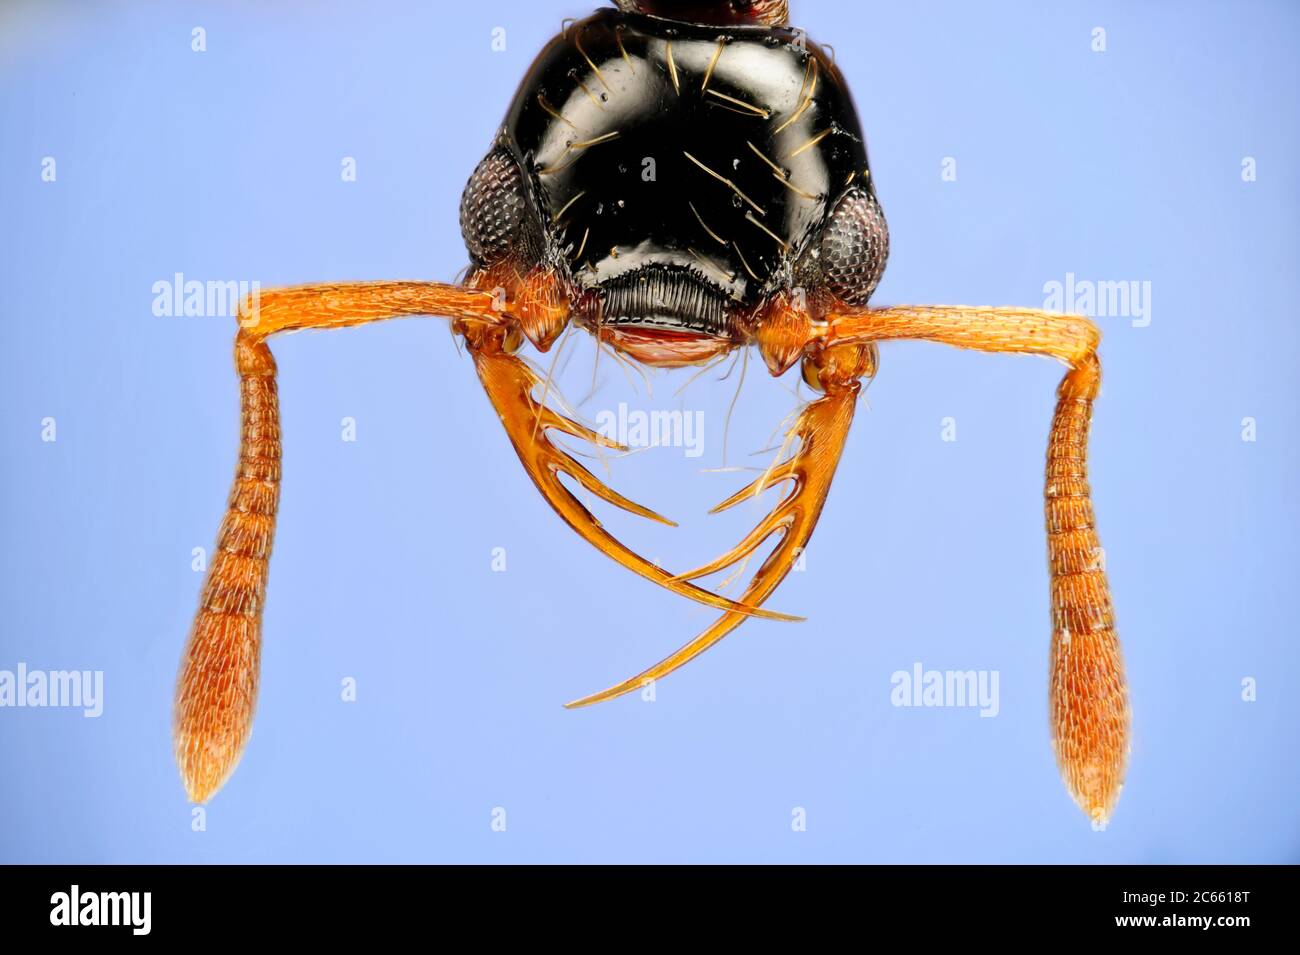 [Digital focus stacking] Ant portrait, Thaumatomyrmex atrox are rarely encountered ants of Neotropical forests. They are specialists predators on millipedes in the order Polyxenida., Picture was taken in cooperation with the 'Staatl. Museum für Naturkunde Karlsruhe'. Stock Photo